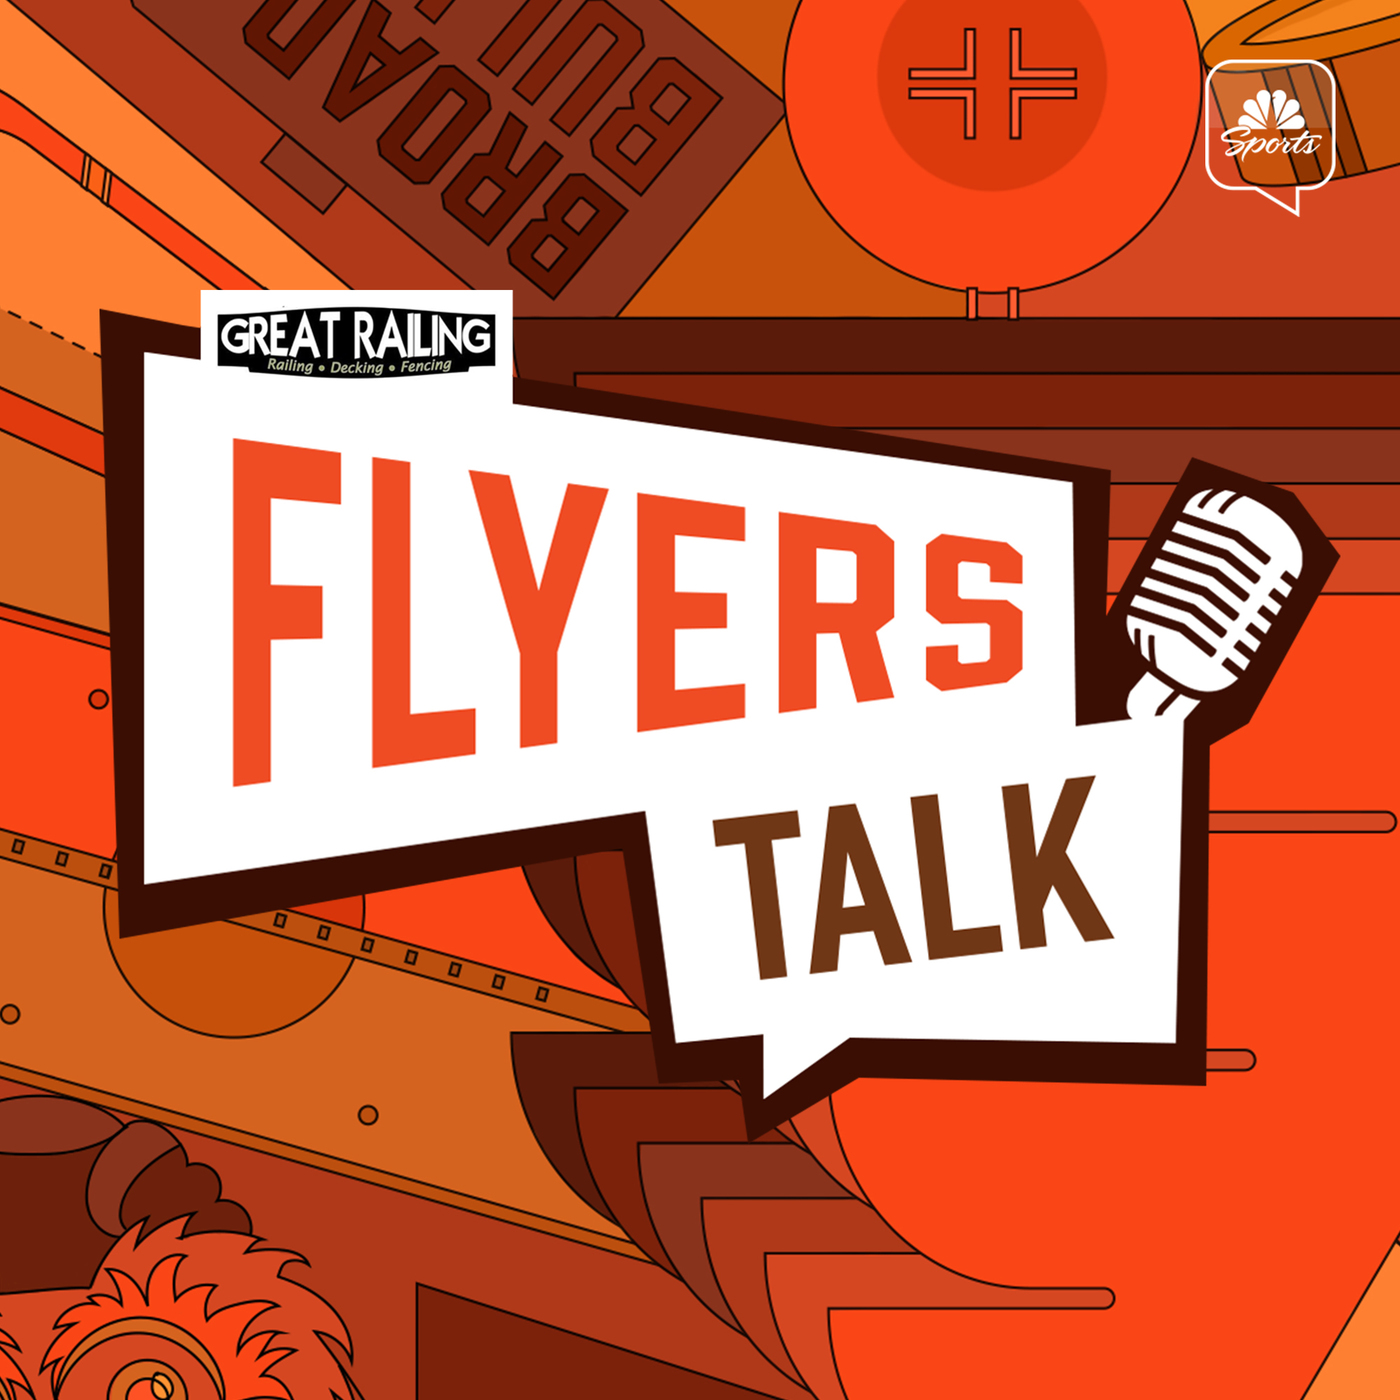 Debating if there are any Flyers untouchables